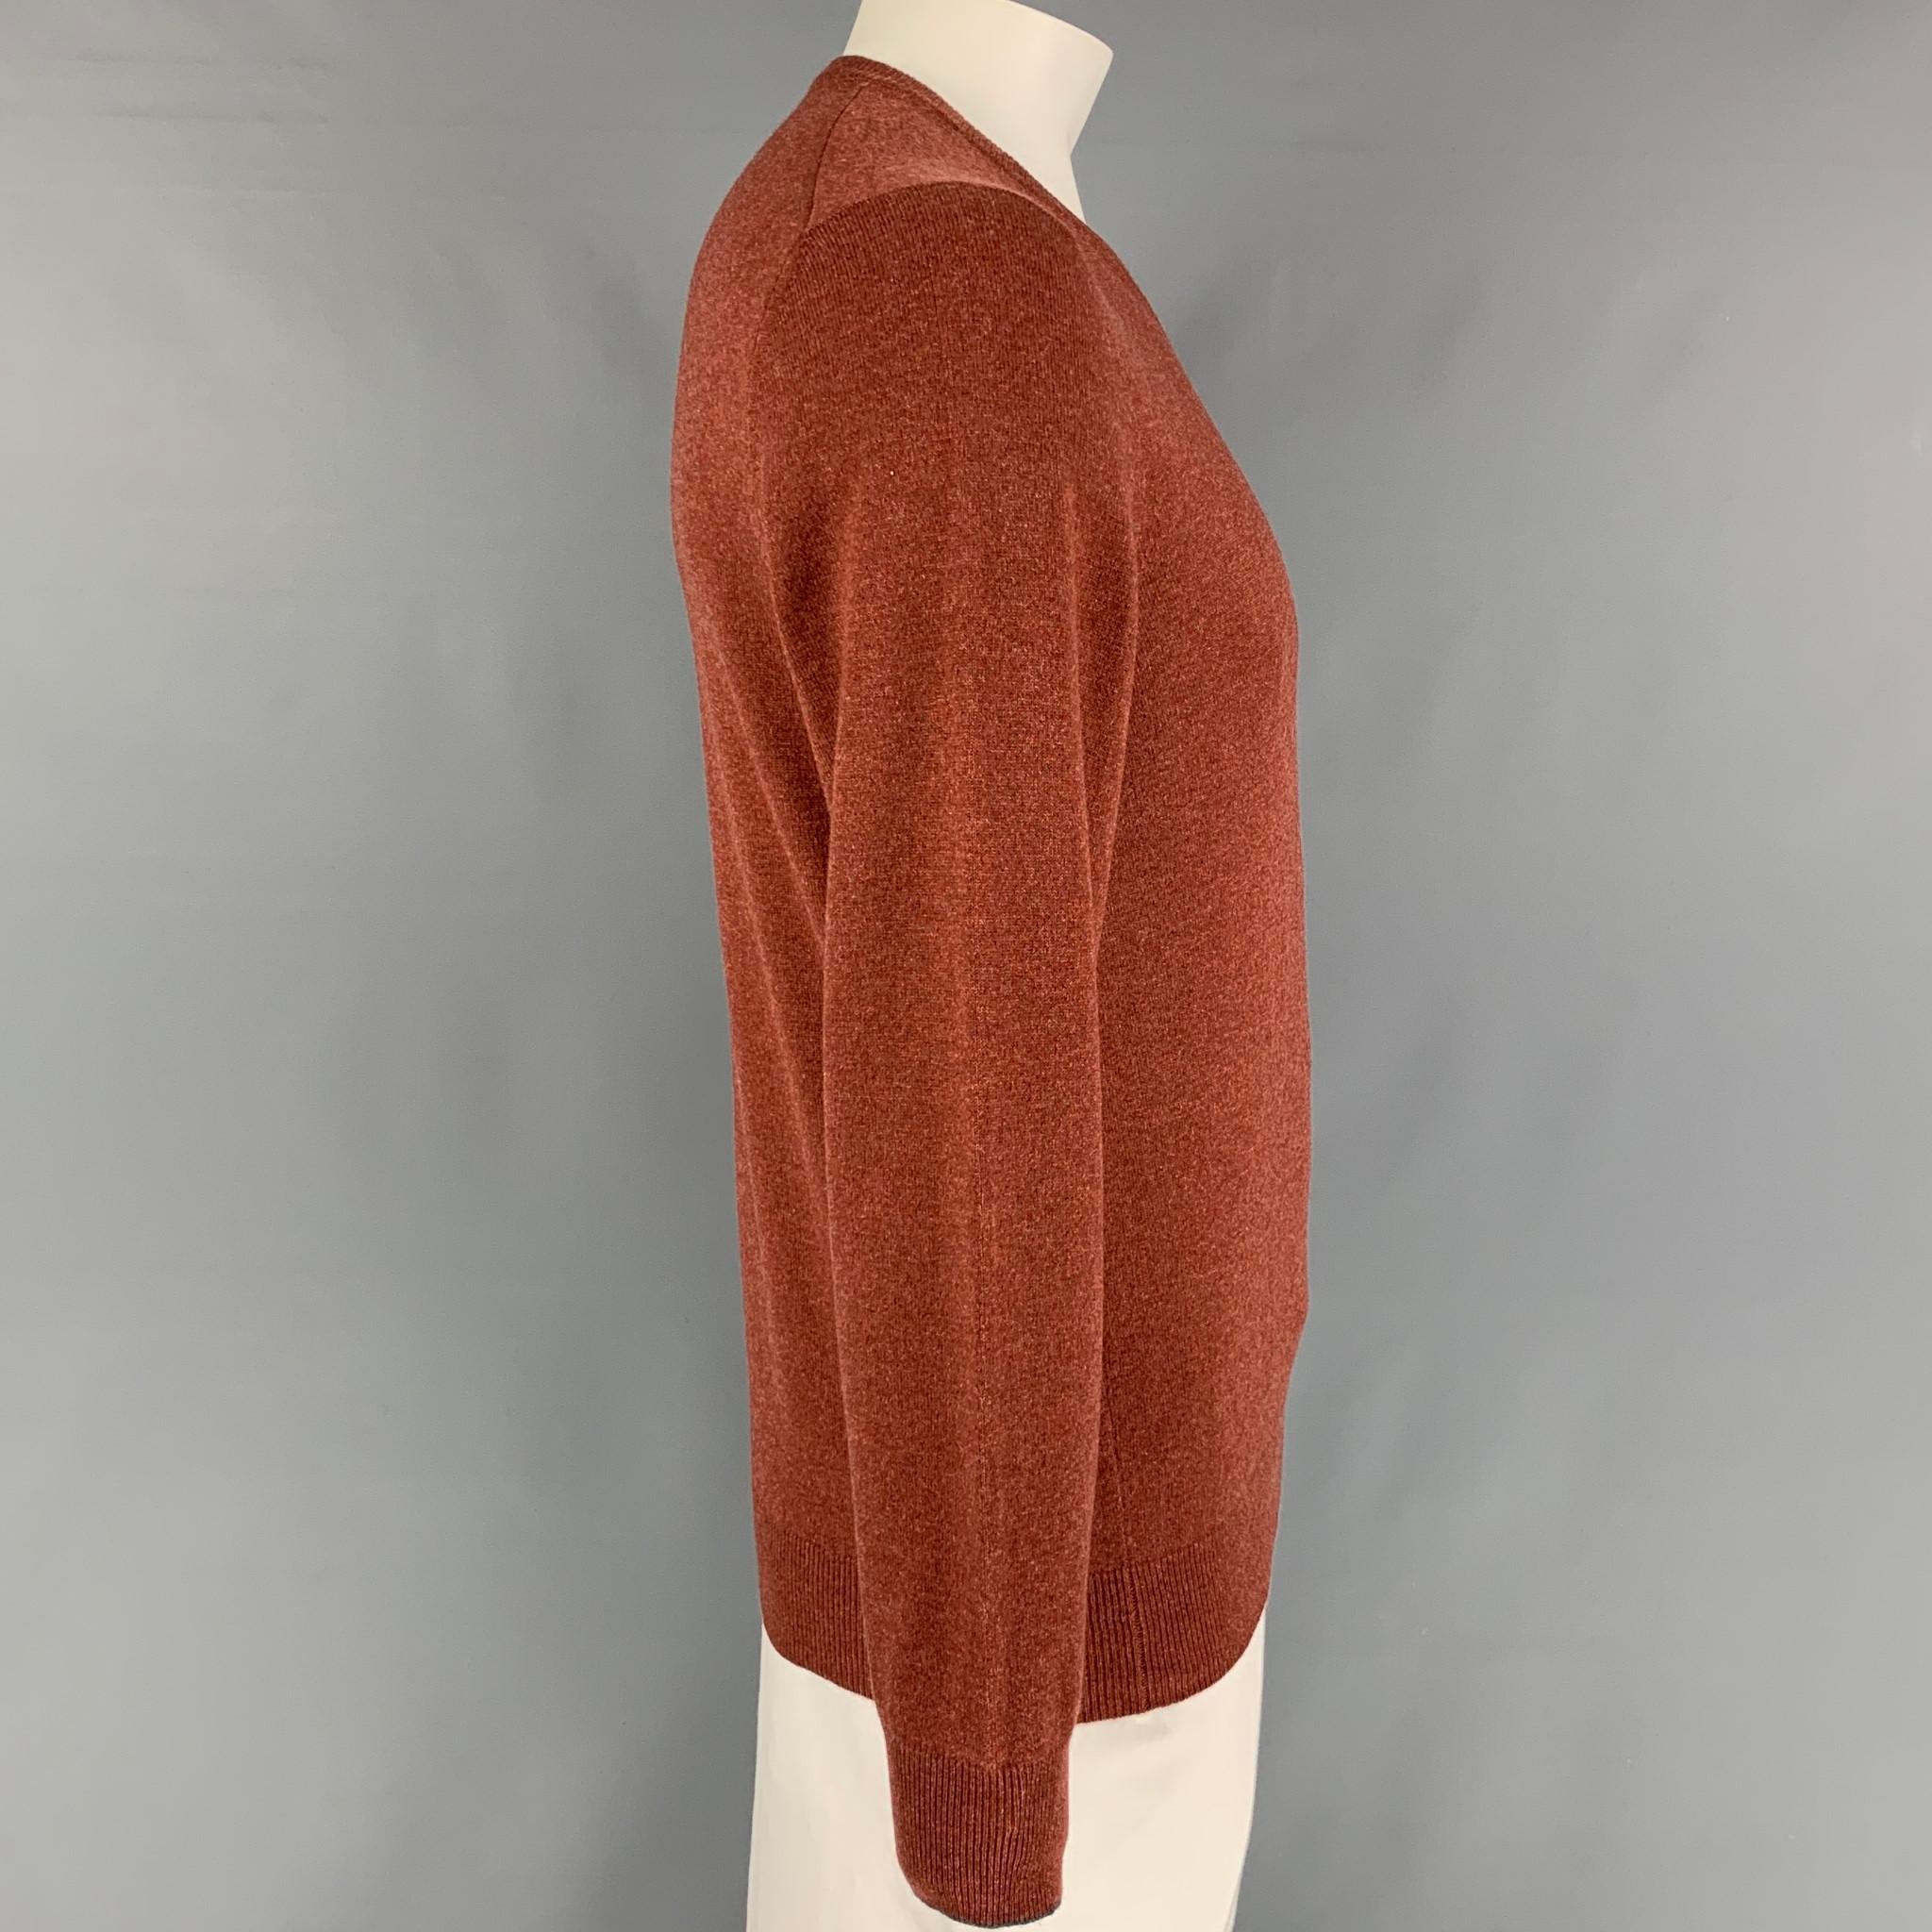 BRUNELLO CUCINELLI sweater comes in a brick knitted cashmere featuring a v-neck. Made in Italy. 

New With Tags. 
Marked: 52

Measurements:

Shoulder:18 in. 
Chest: 42 in.
Sleeve: 27 in.
Length: 27 in. 